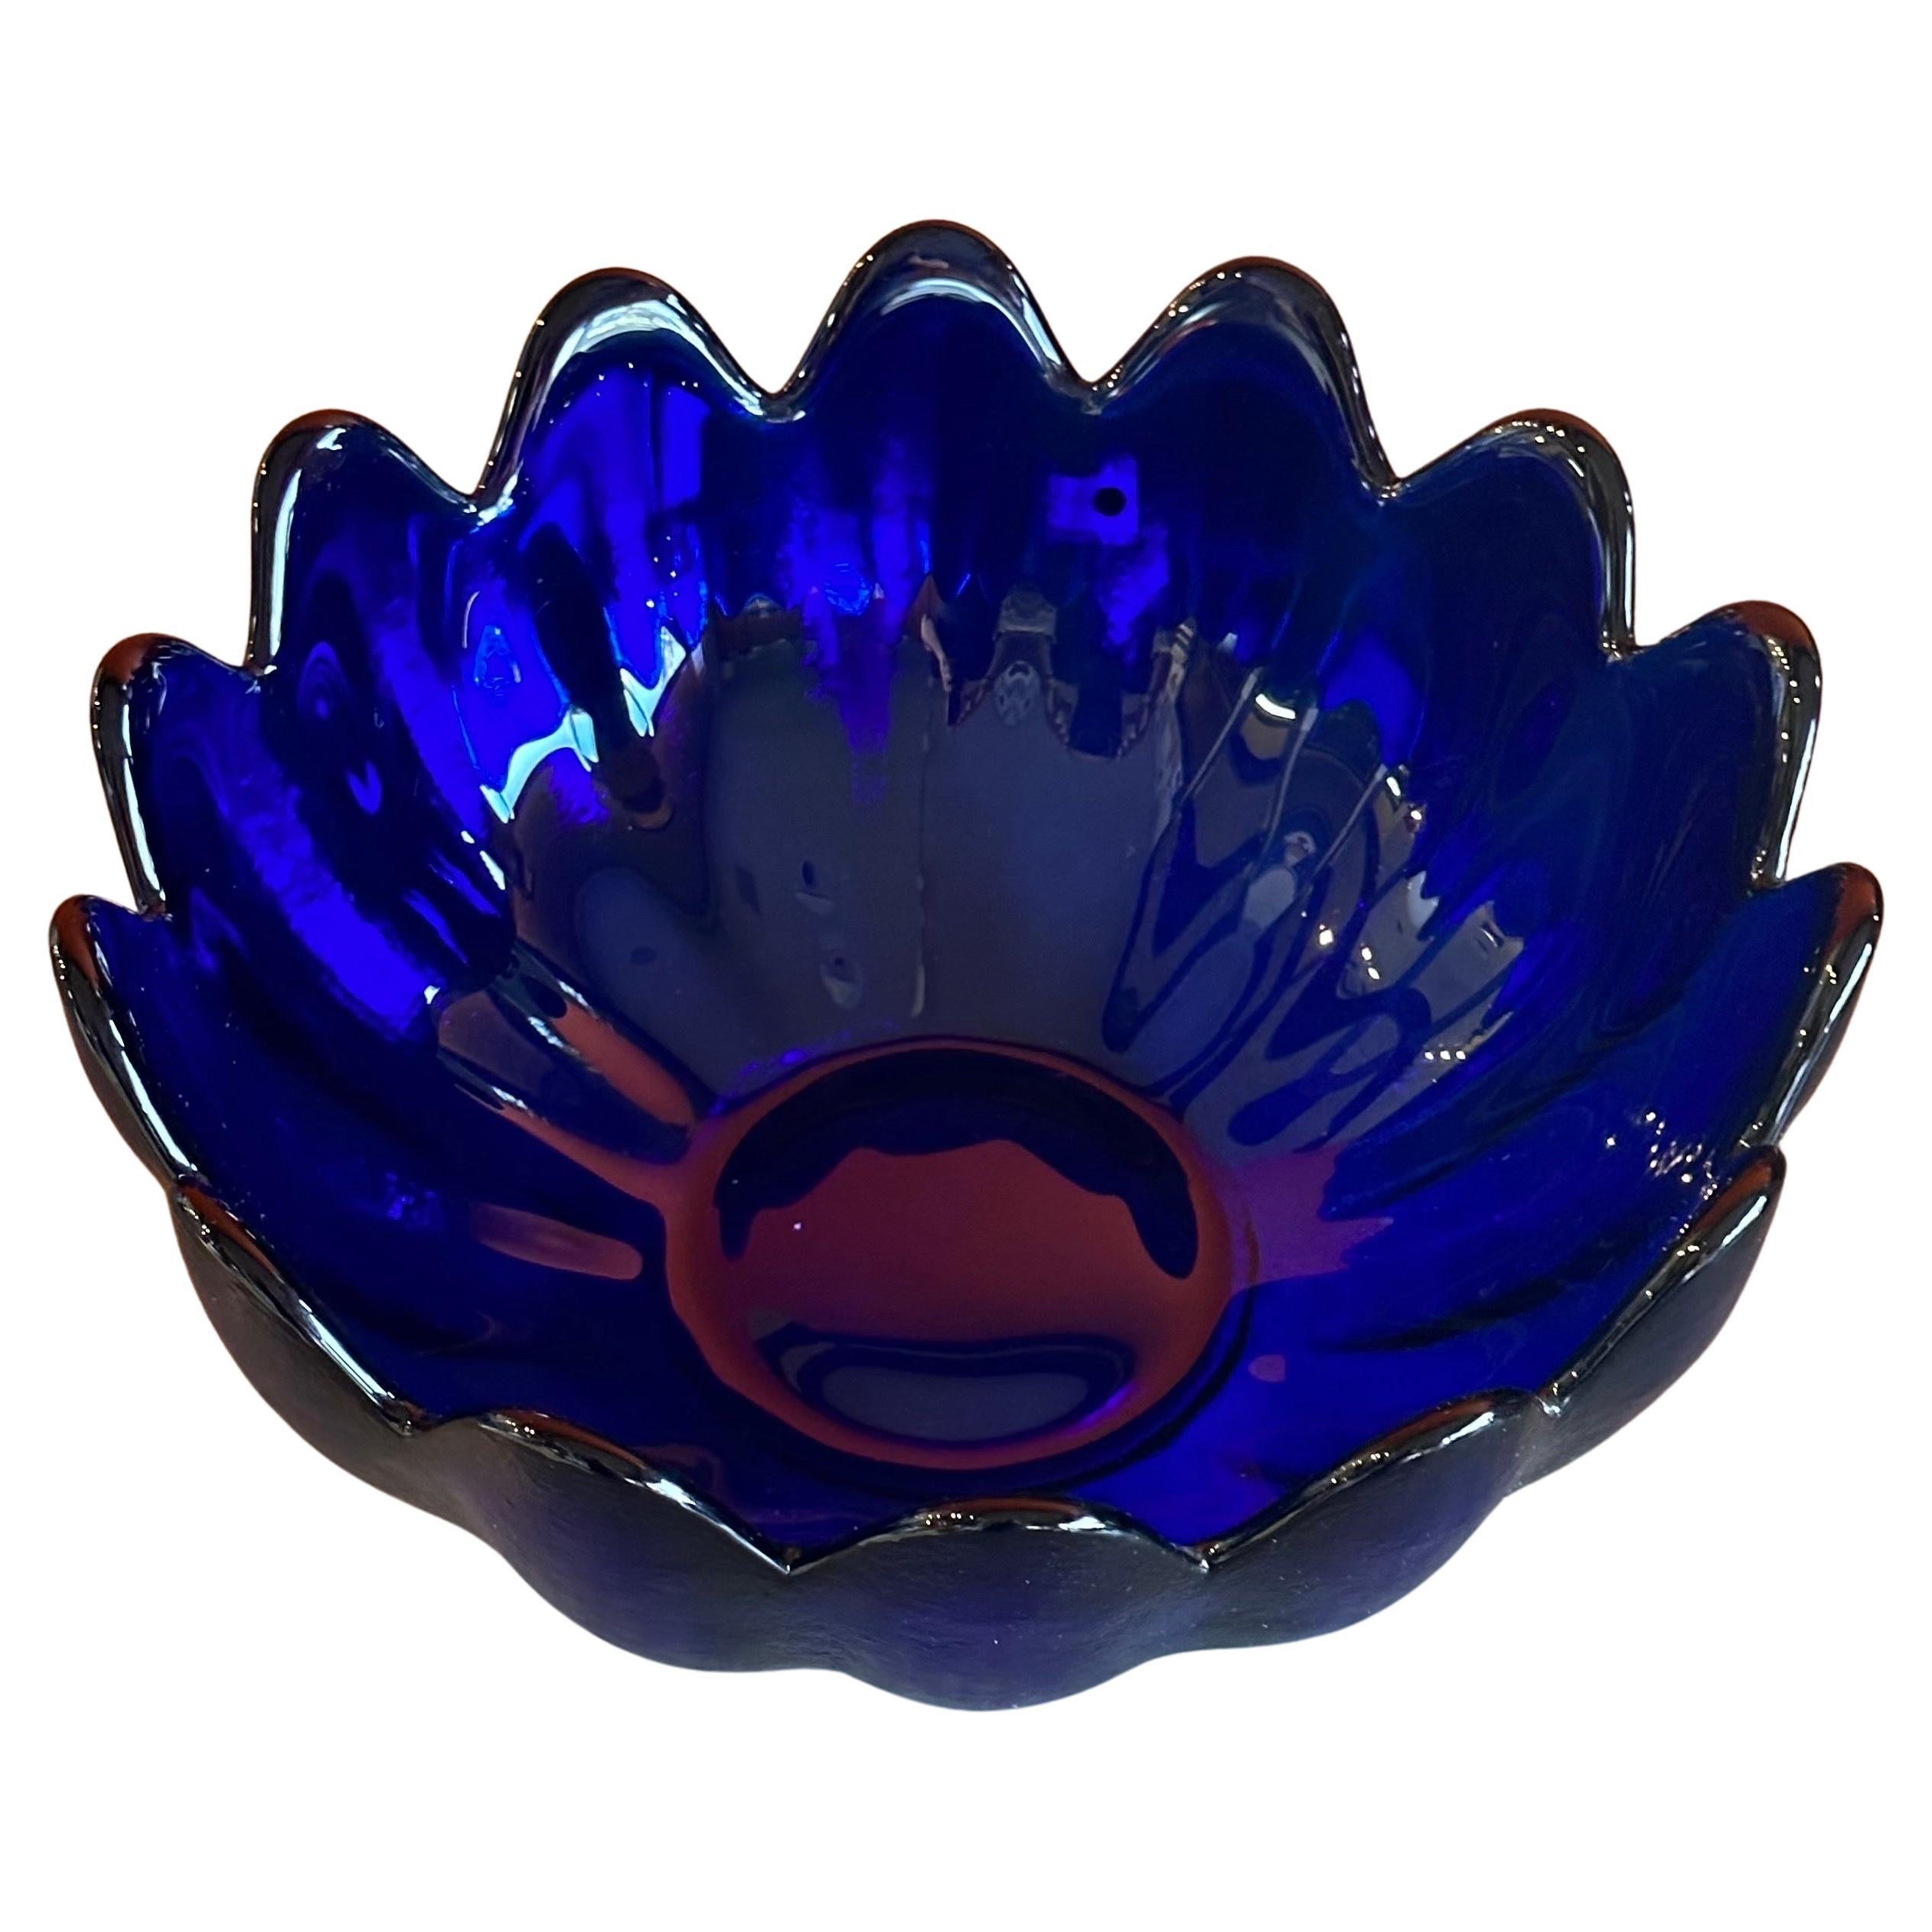 Large cobalt blue art glass scalloped edge petal bowl by Blenko Glass, circa 1990s.  This beautiful piece is signed (foil Blenko sticker attached) and conceptualizes the beauty and glow of cobalt blue handblown glass and texture.  Beautiful piece of